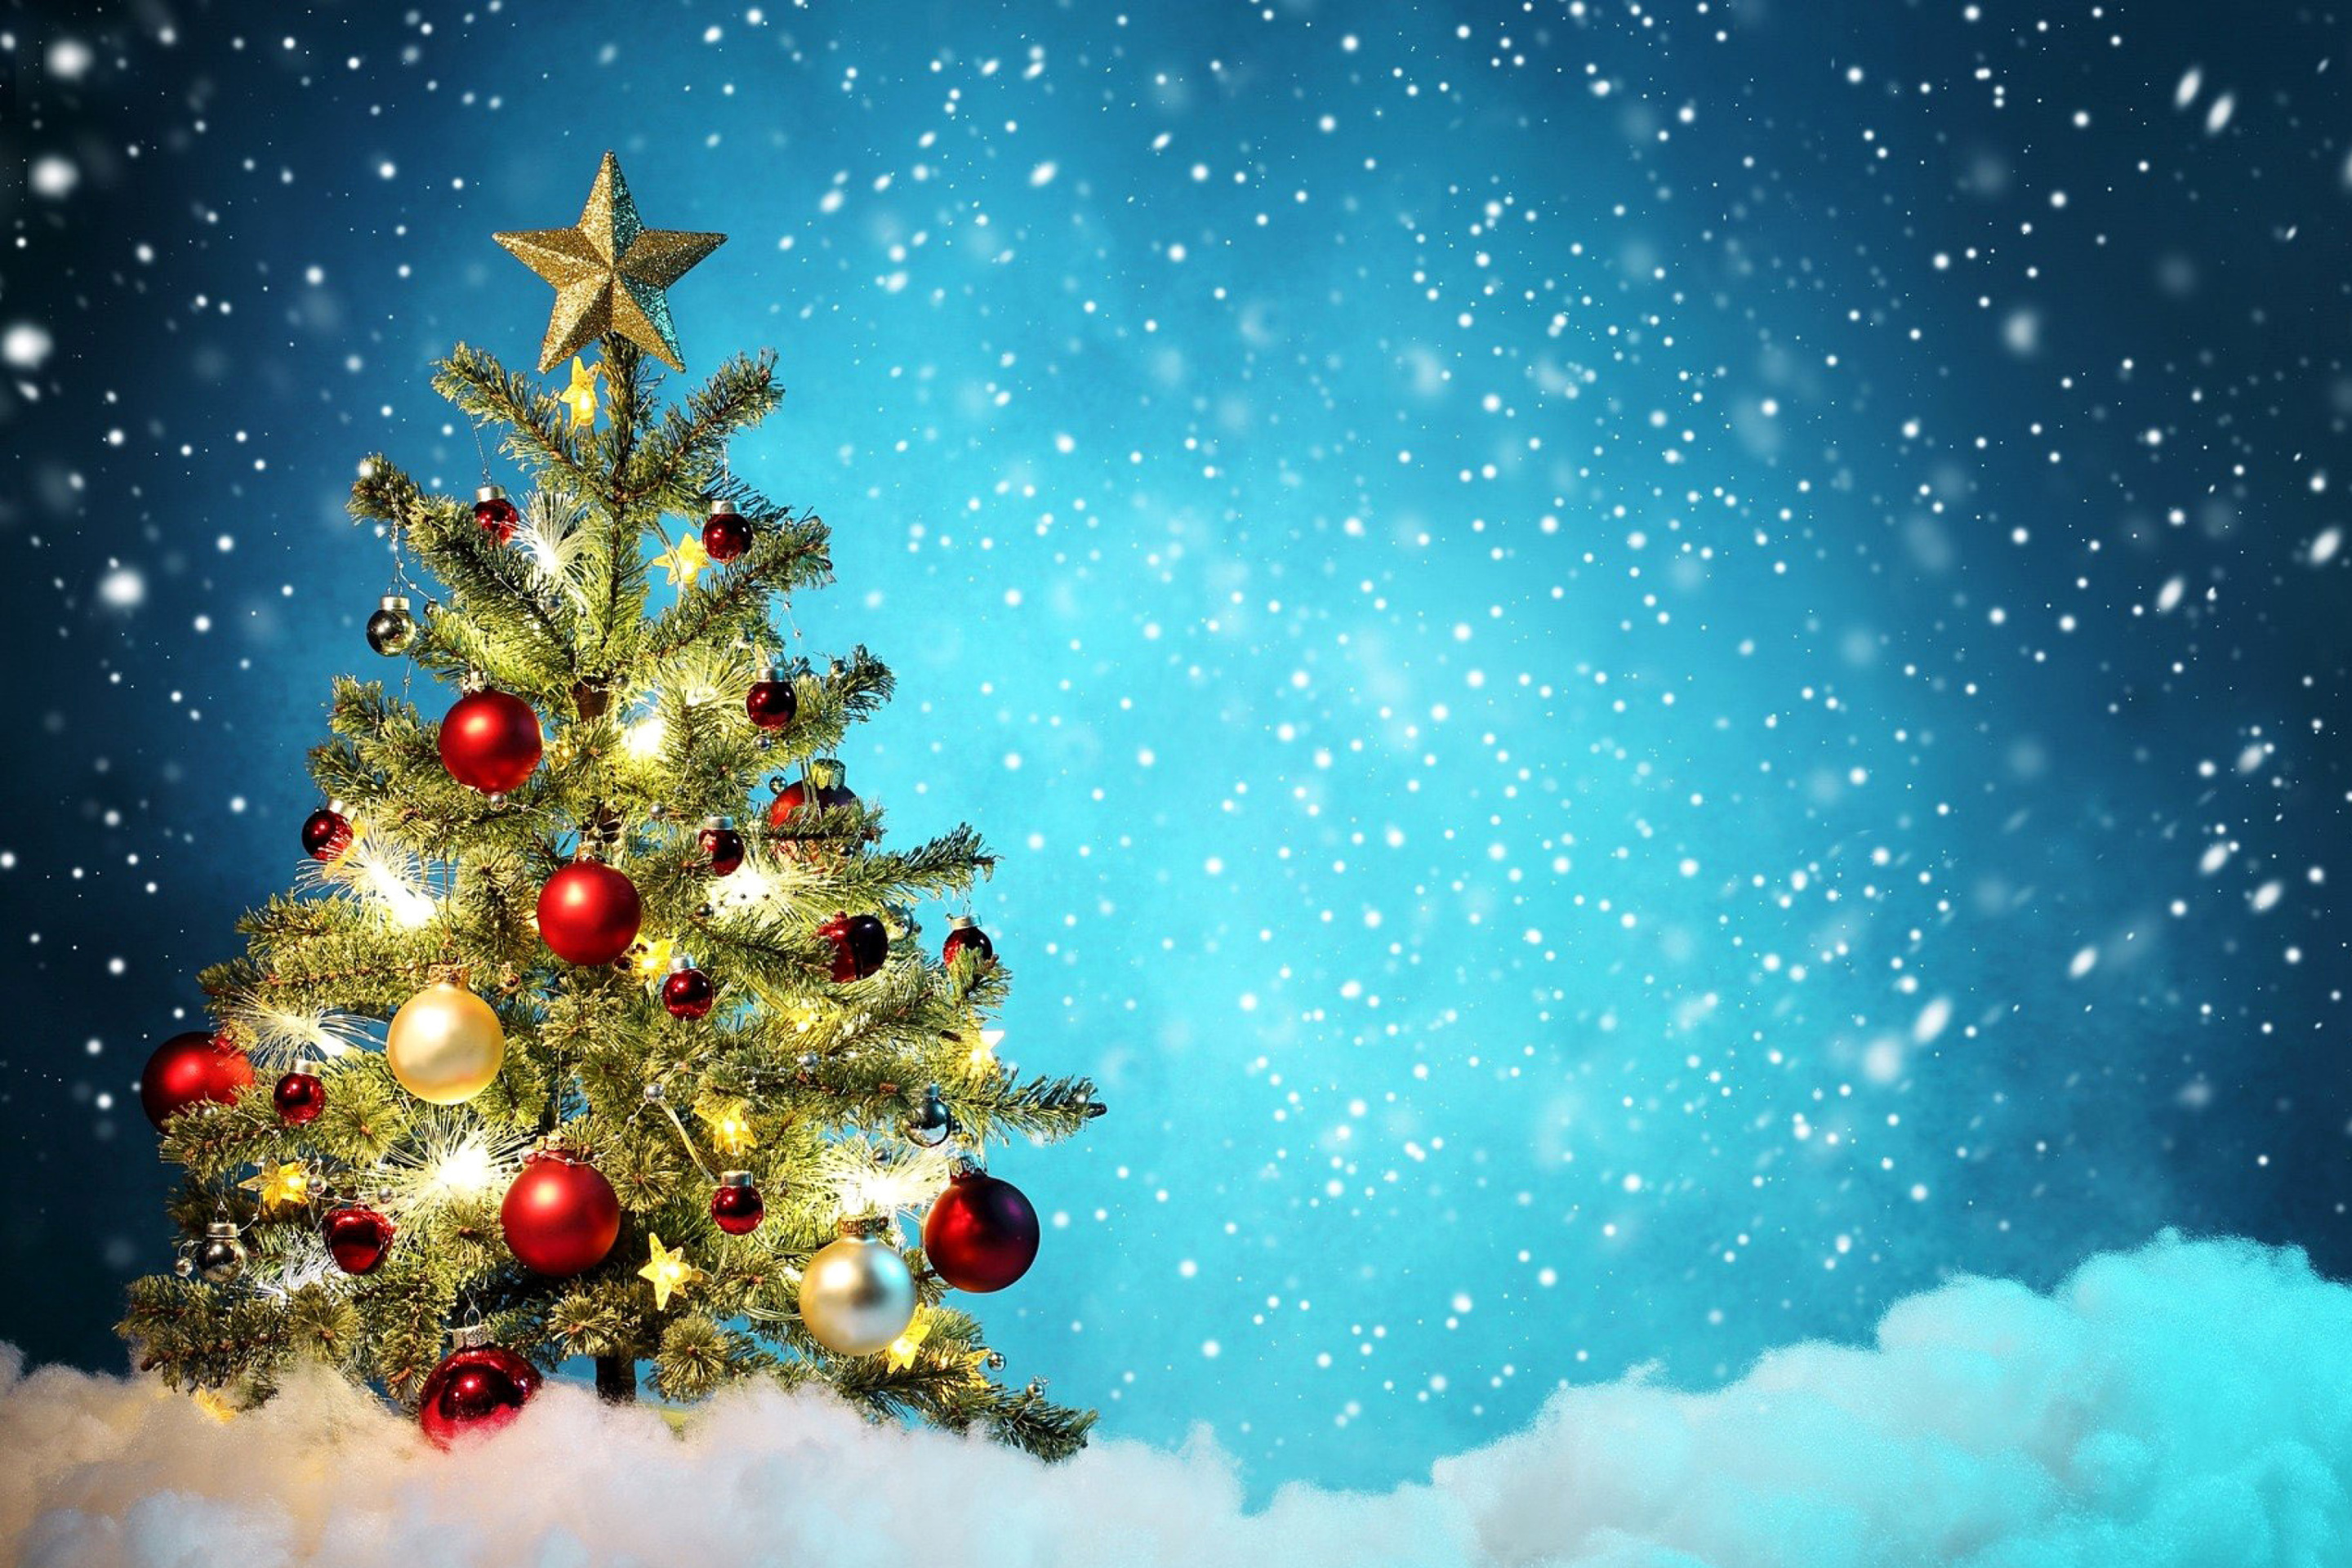 New Year Tree and Snow wallpaper 2880x1920